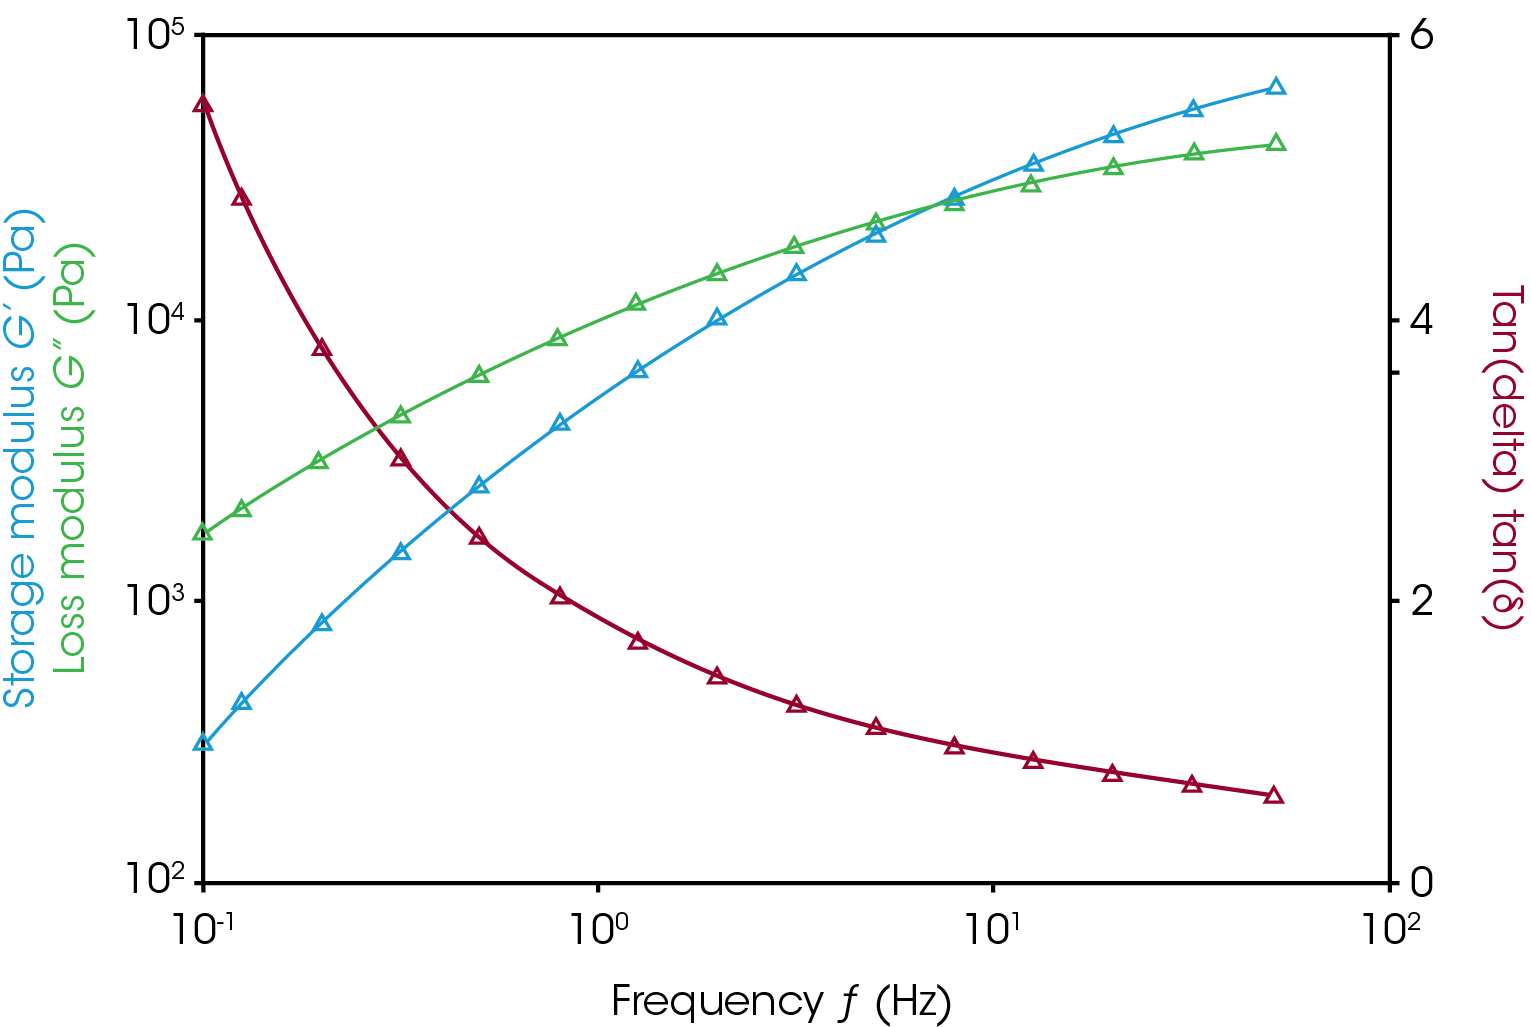 Figure 1. Frequency sweep of polystyrene at 220 °C (left) and amplitude sweeps of polystyrene at 220 °C (right). The critical strain (labelled in plot with red lines) increases with decreasing frequency. The critical strain was defined as the point at which the log-stress log-strain derivative slope (green) dropped below 0.97. A value of 1 indicates a linear relationship between stress and strain. These experiments were done on a DHR with 25 mm parallel plates.